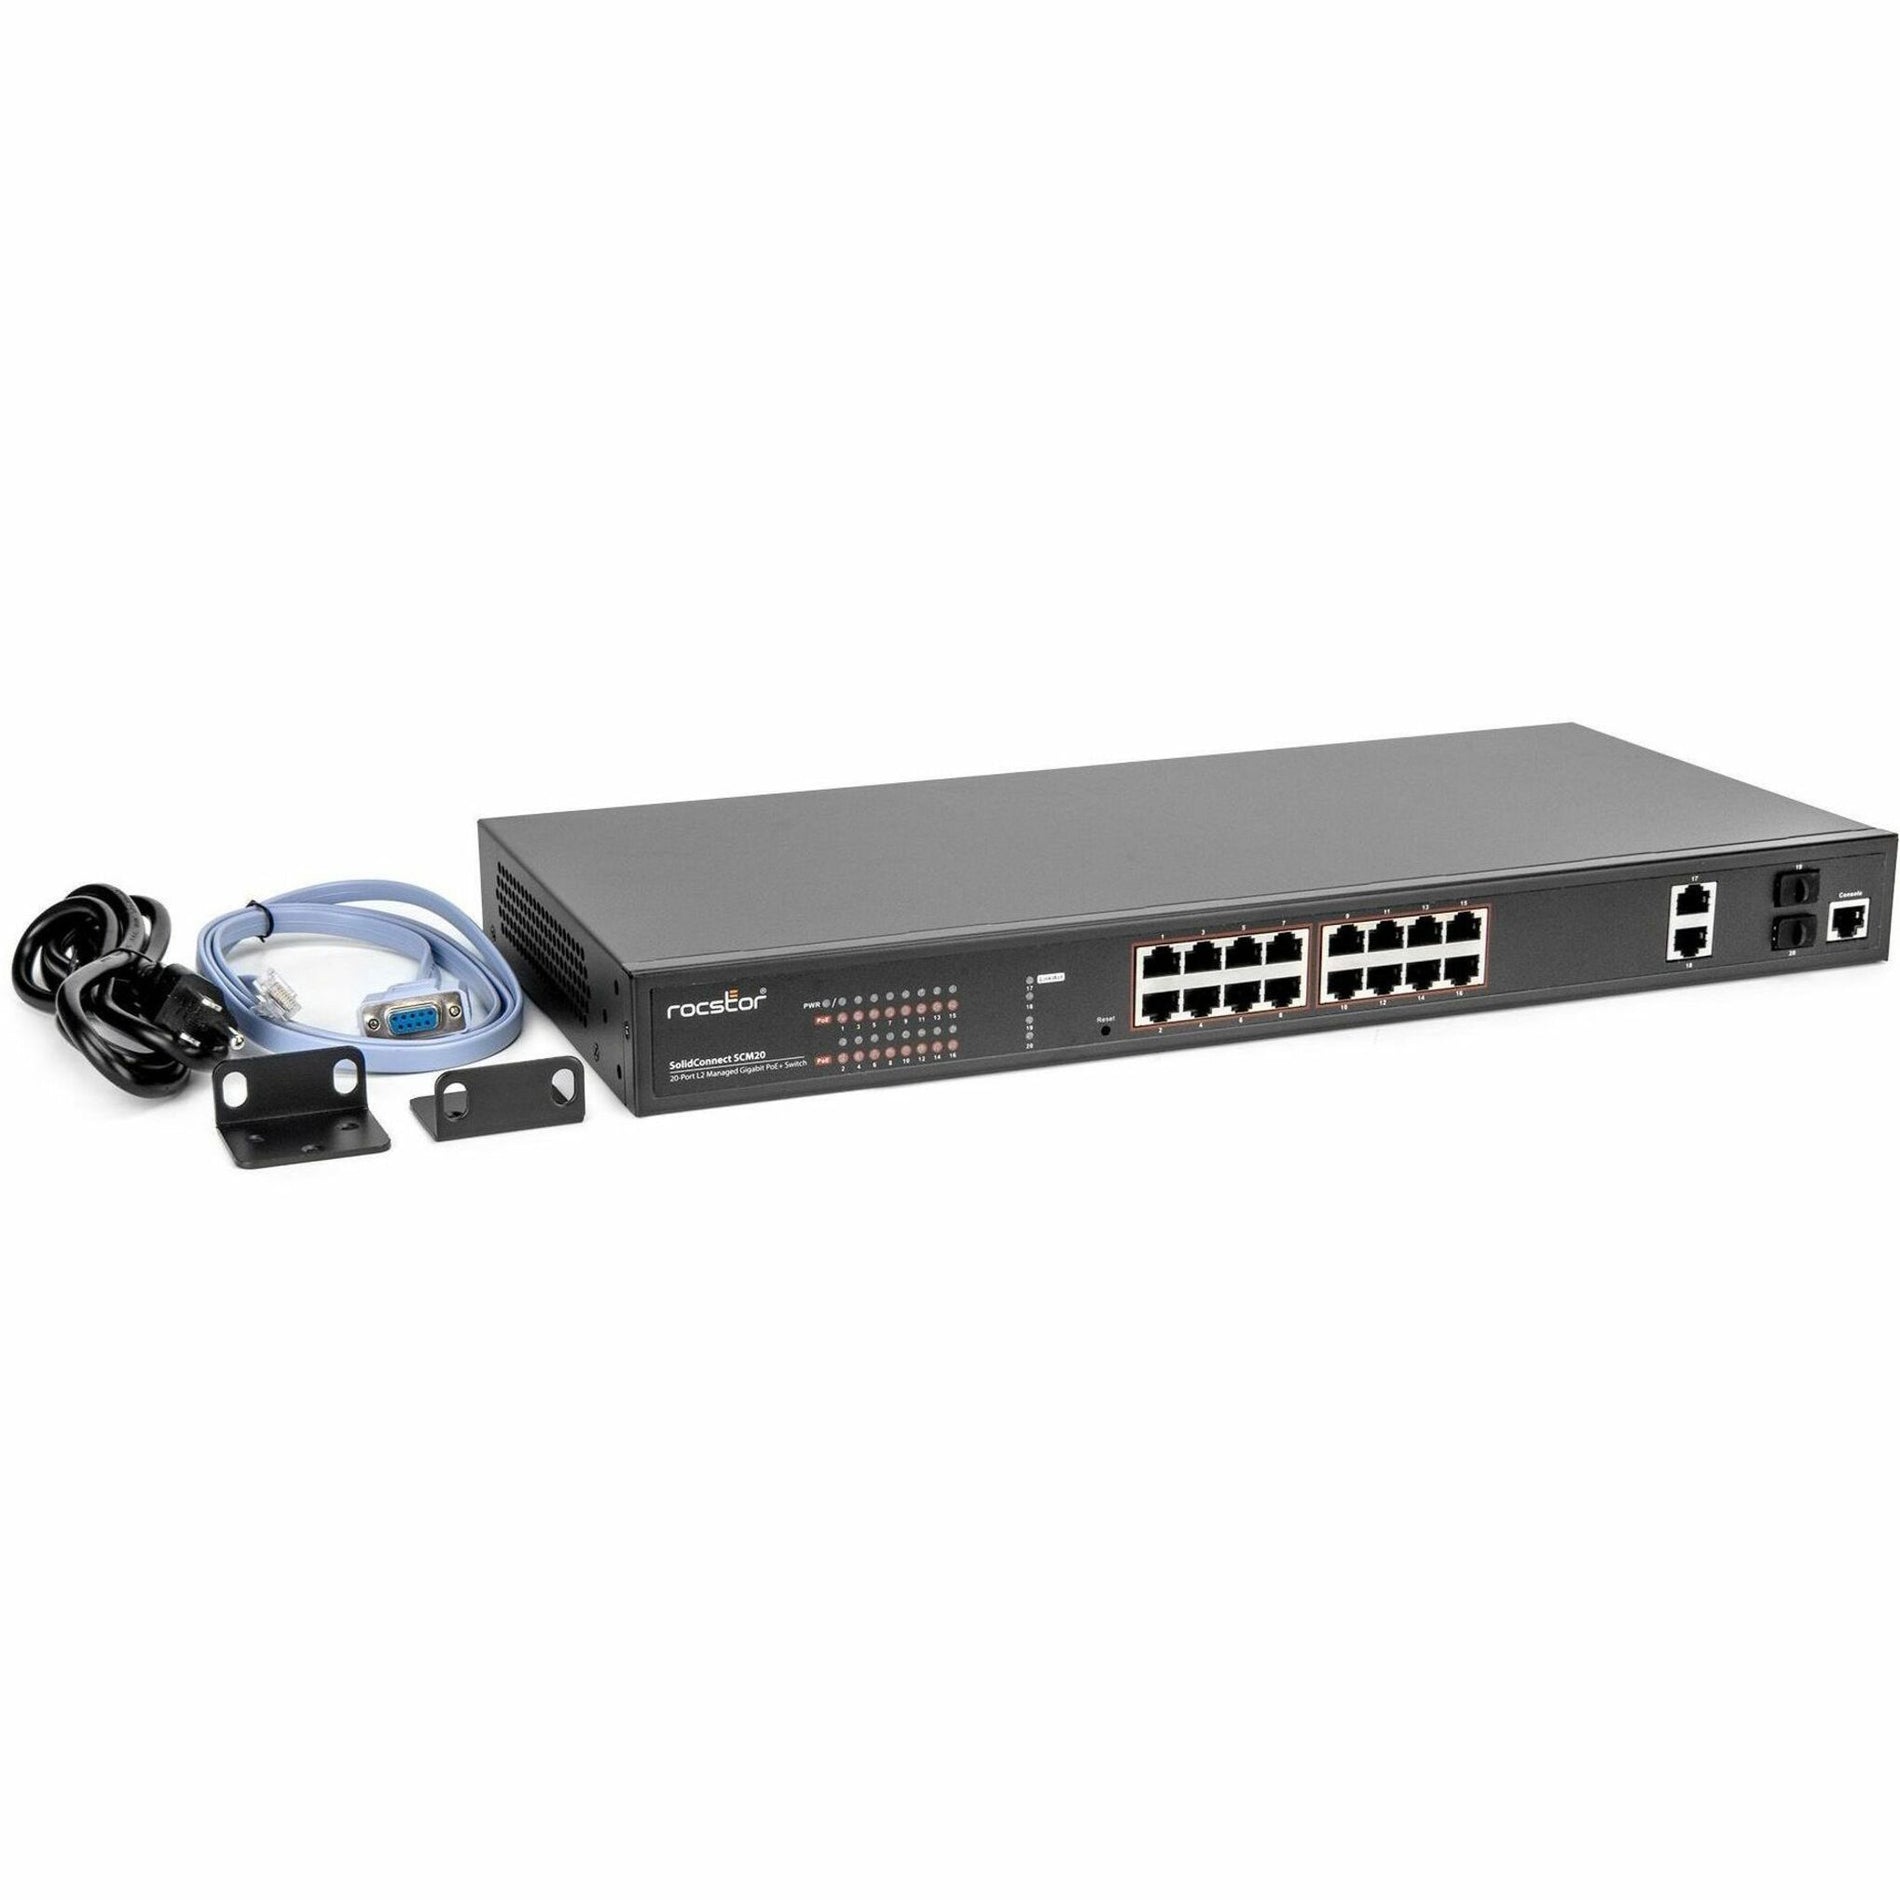 Rocstor Y10S010-B1 SolidConnect SCM20 16-Port PoE+ Gigabit Managed Switch, Industrial Network Government